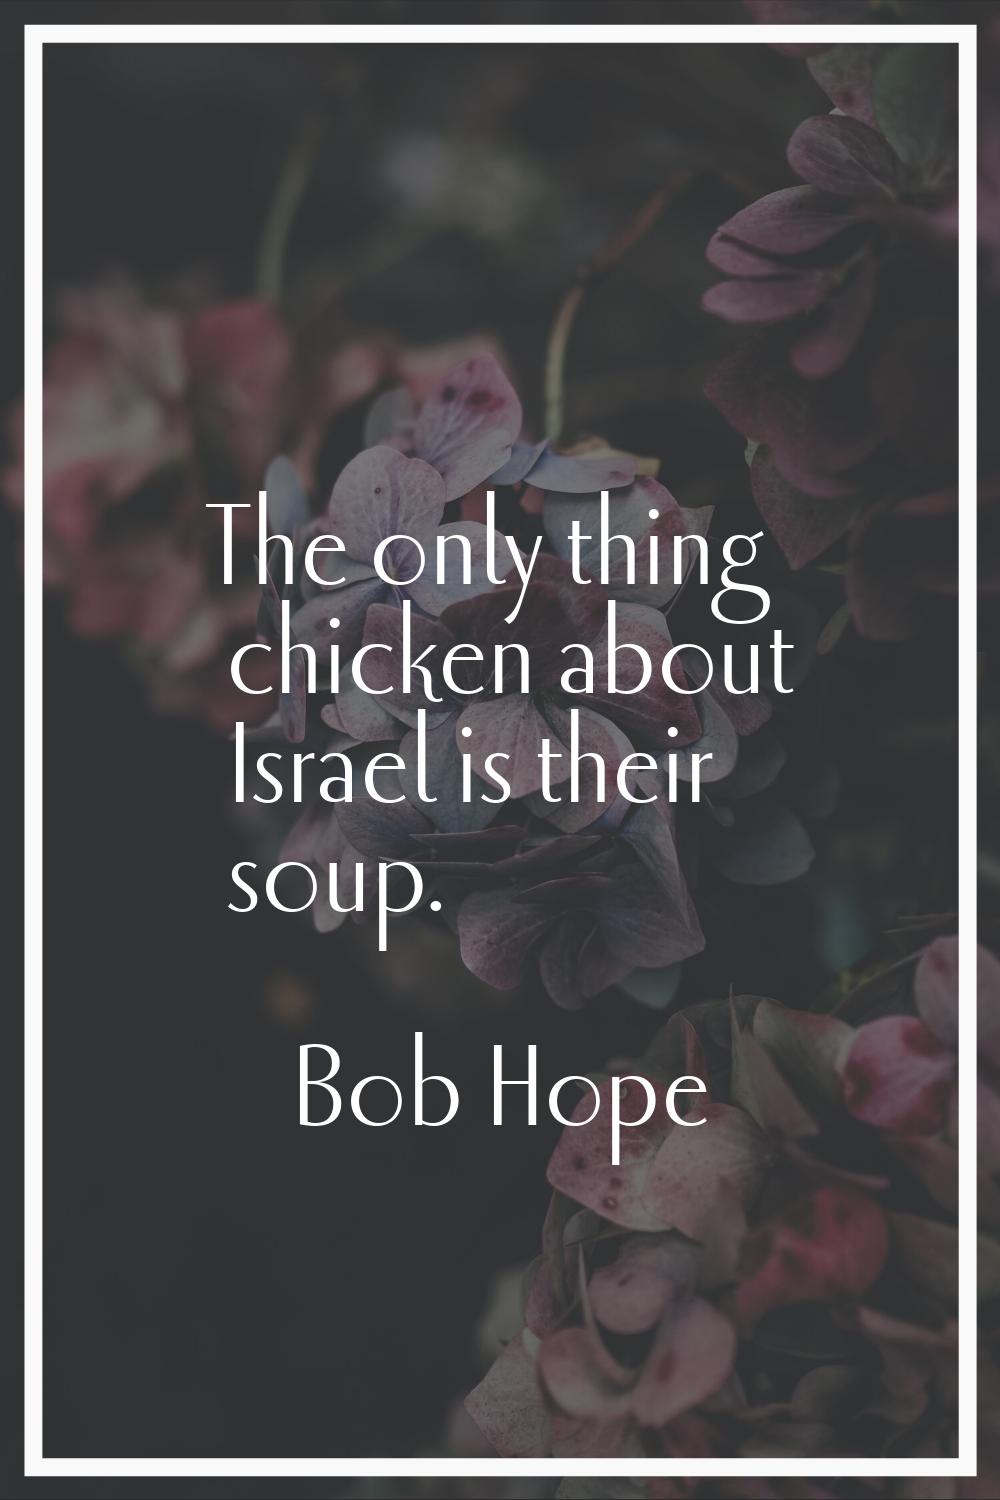 The only thing chicken about Israel is their soup.